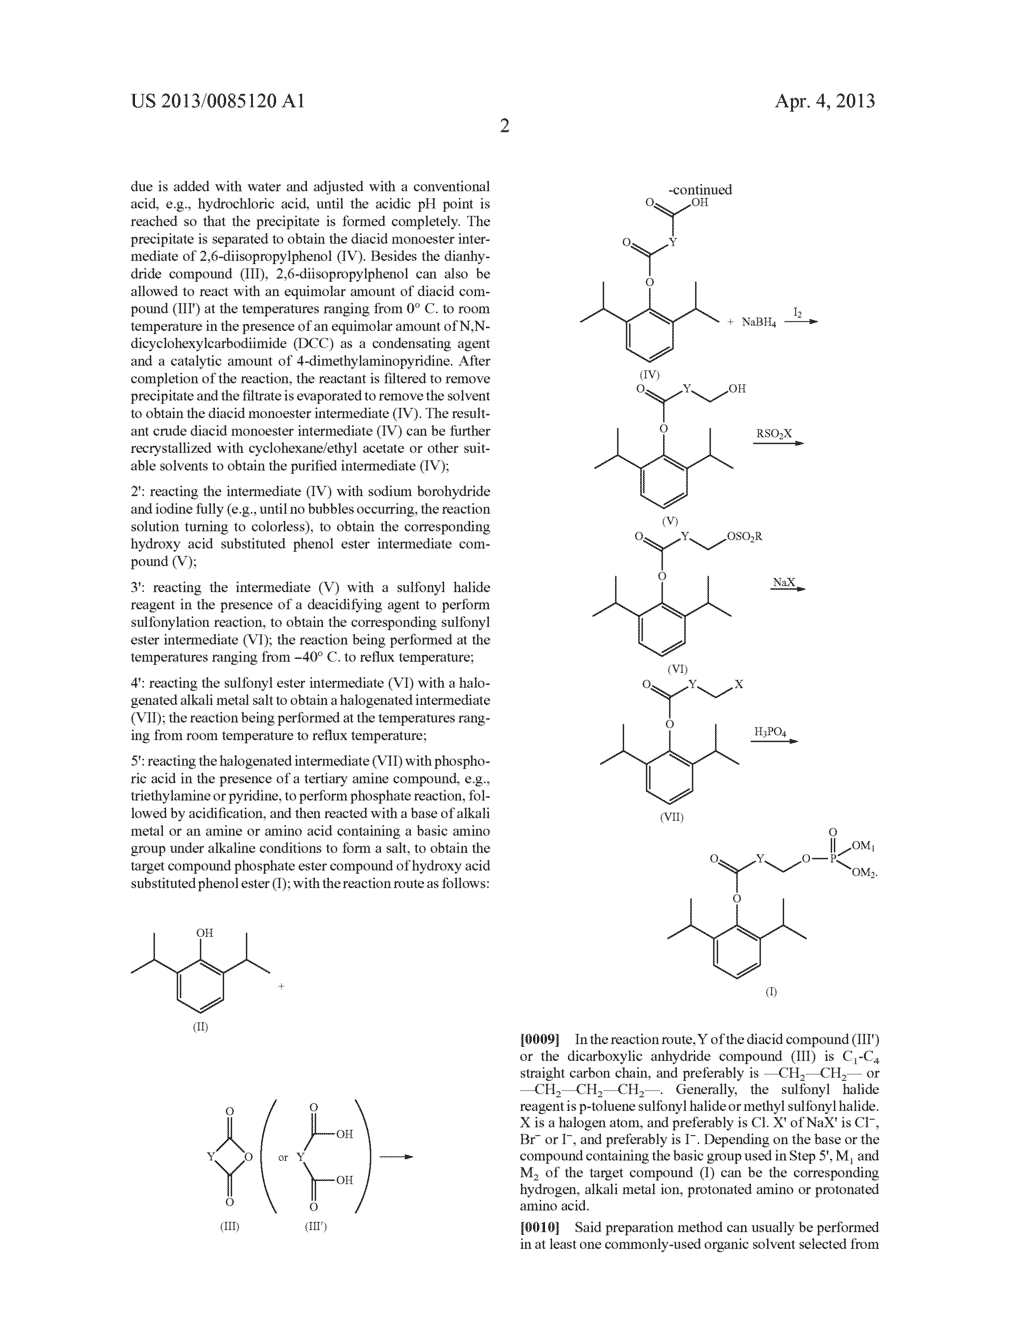 Phosphate Ester Compound of Hydroxy Acid Substituted Phenol Ester,     Preparation Method and Medical Use Thereof - diagram, schematic, and image 04